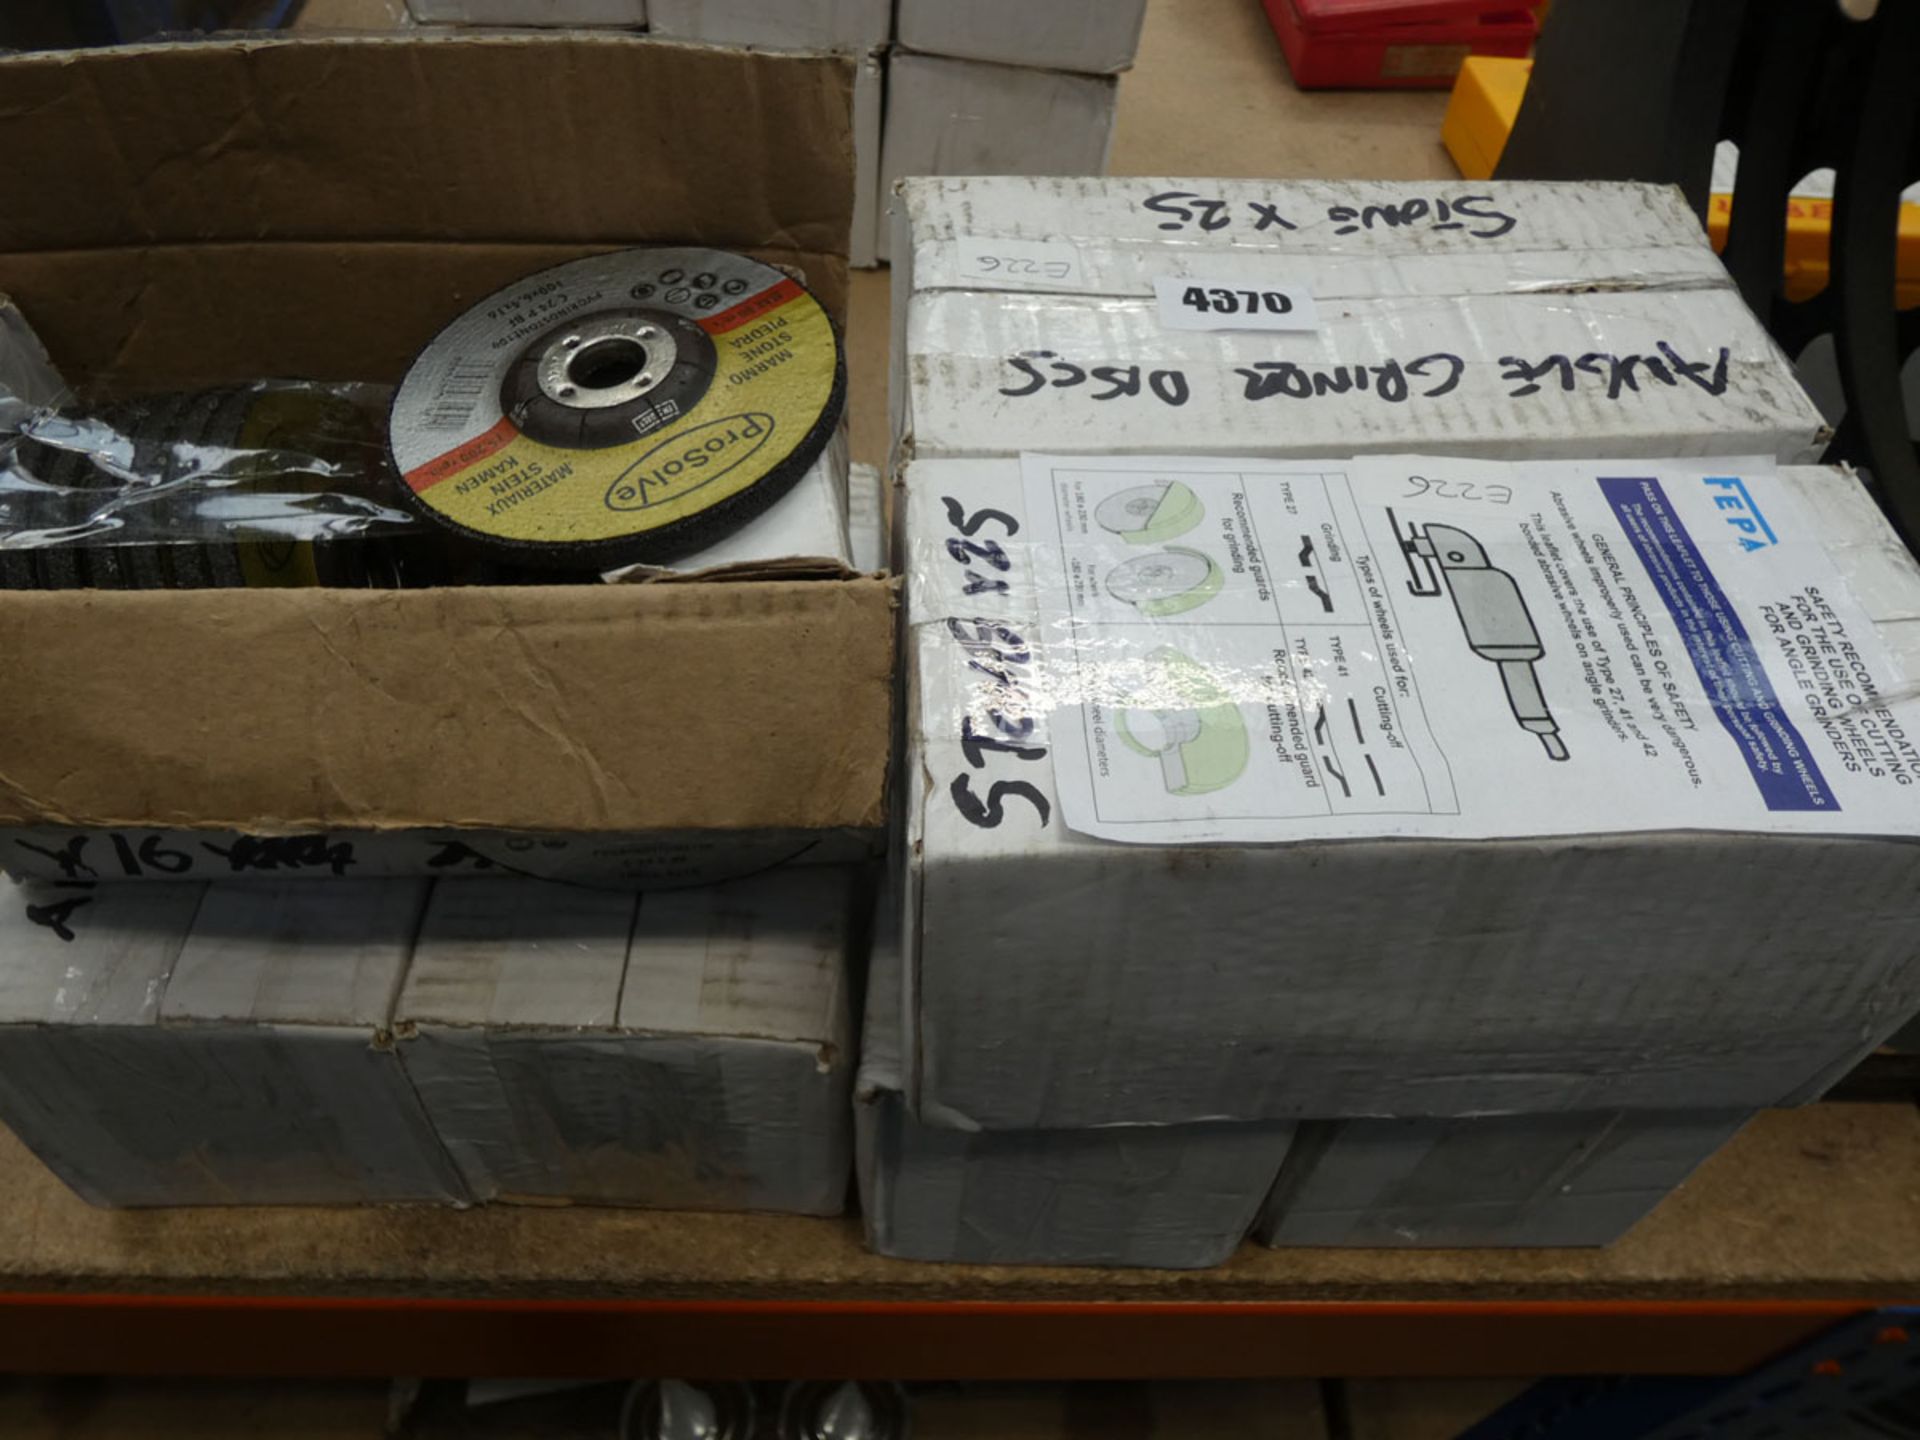 7 boxes of angle grinder stone discs